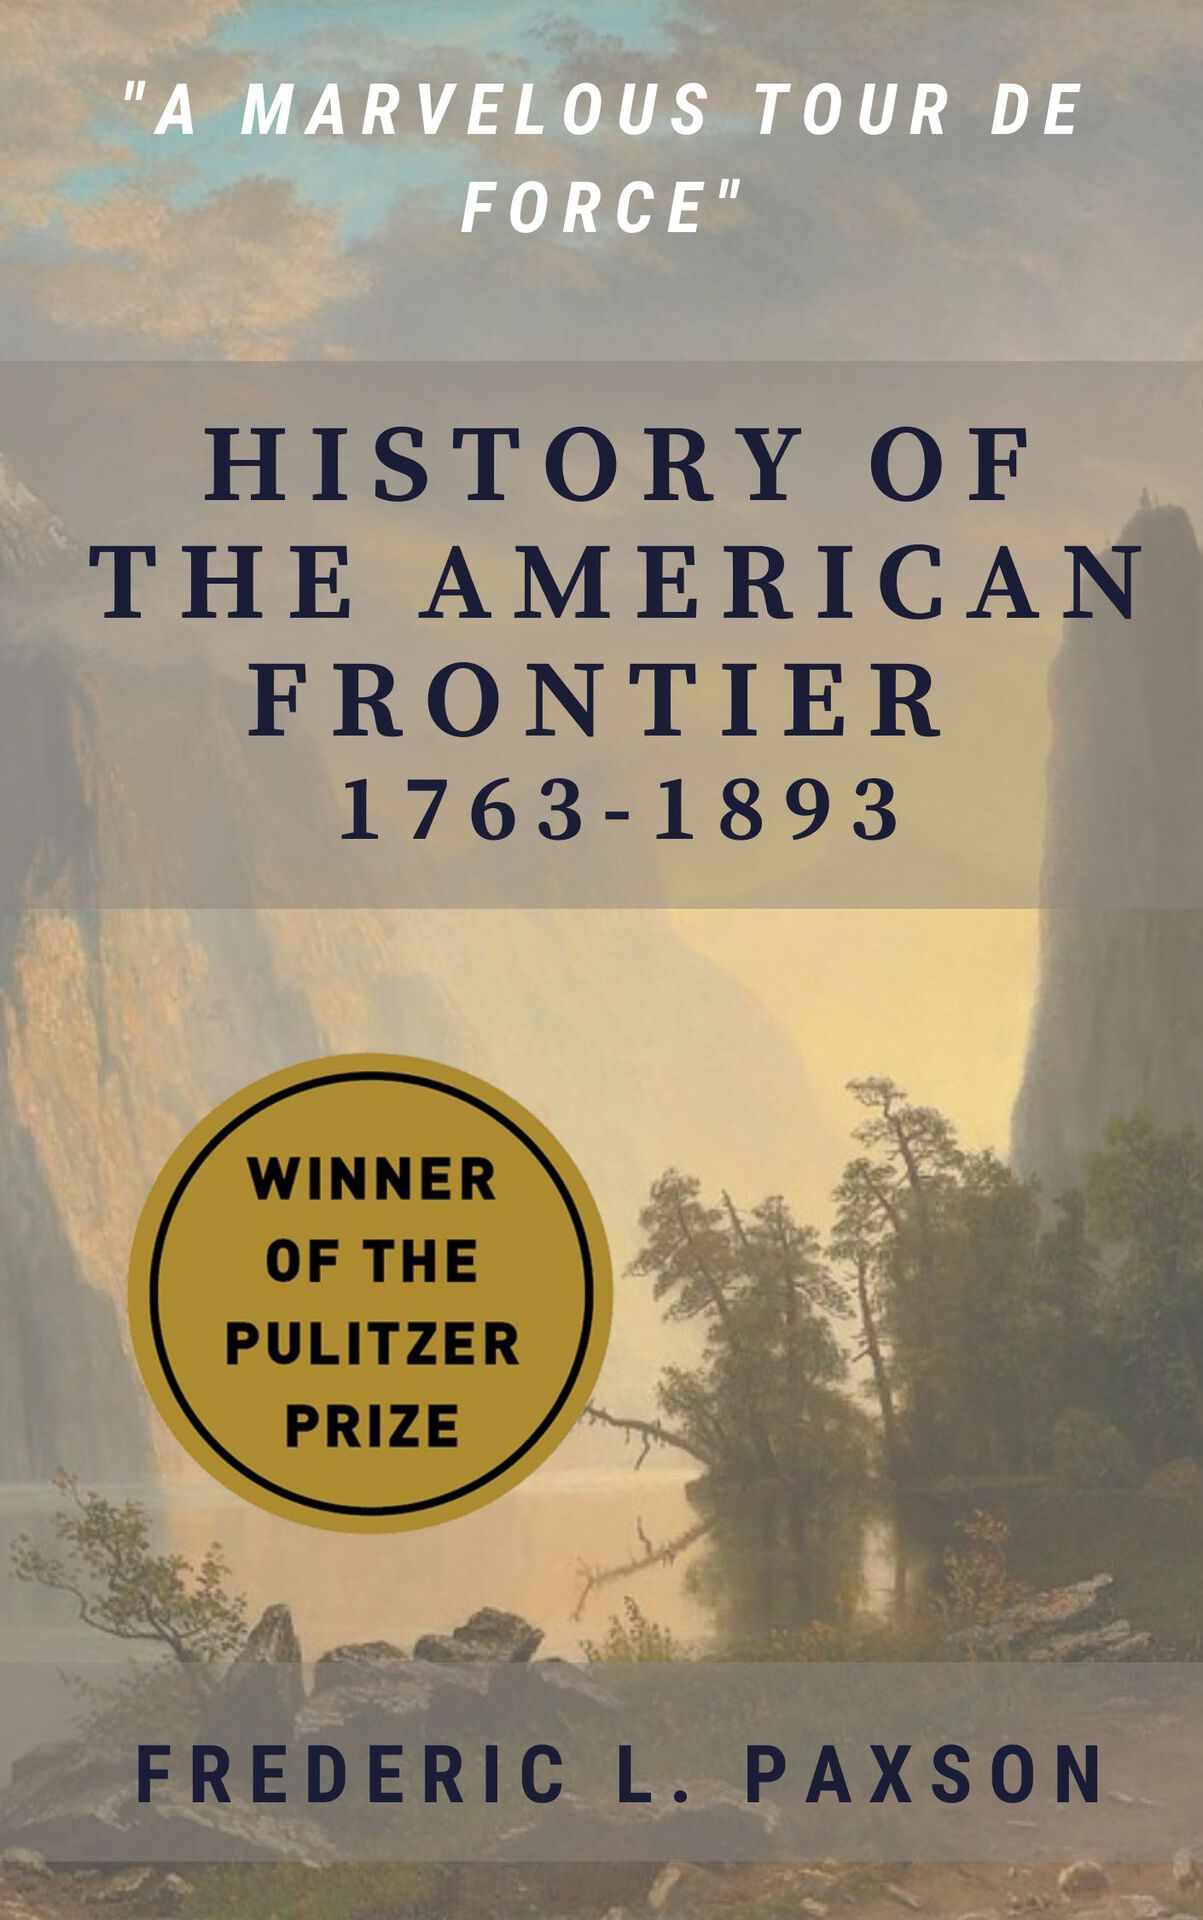 History of the American Frontier 1763-1893